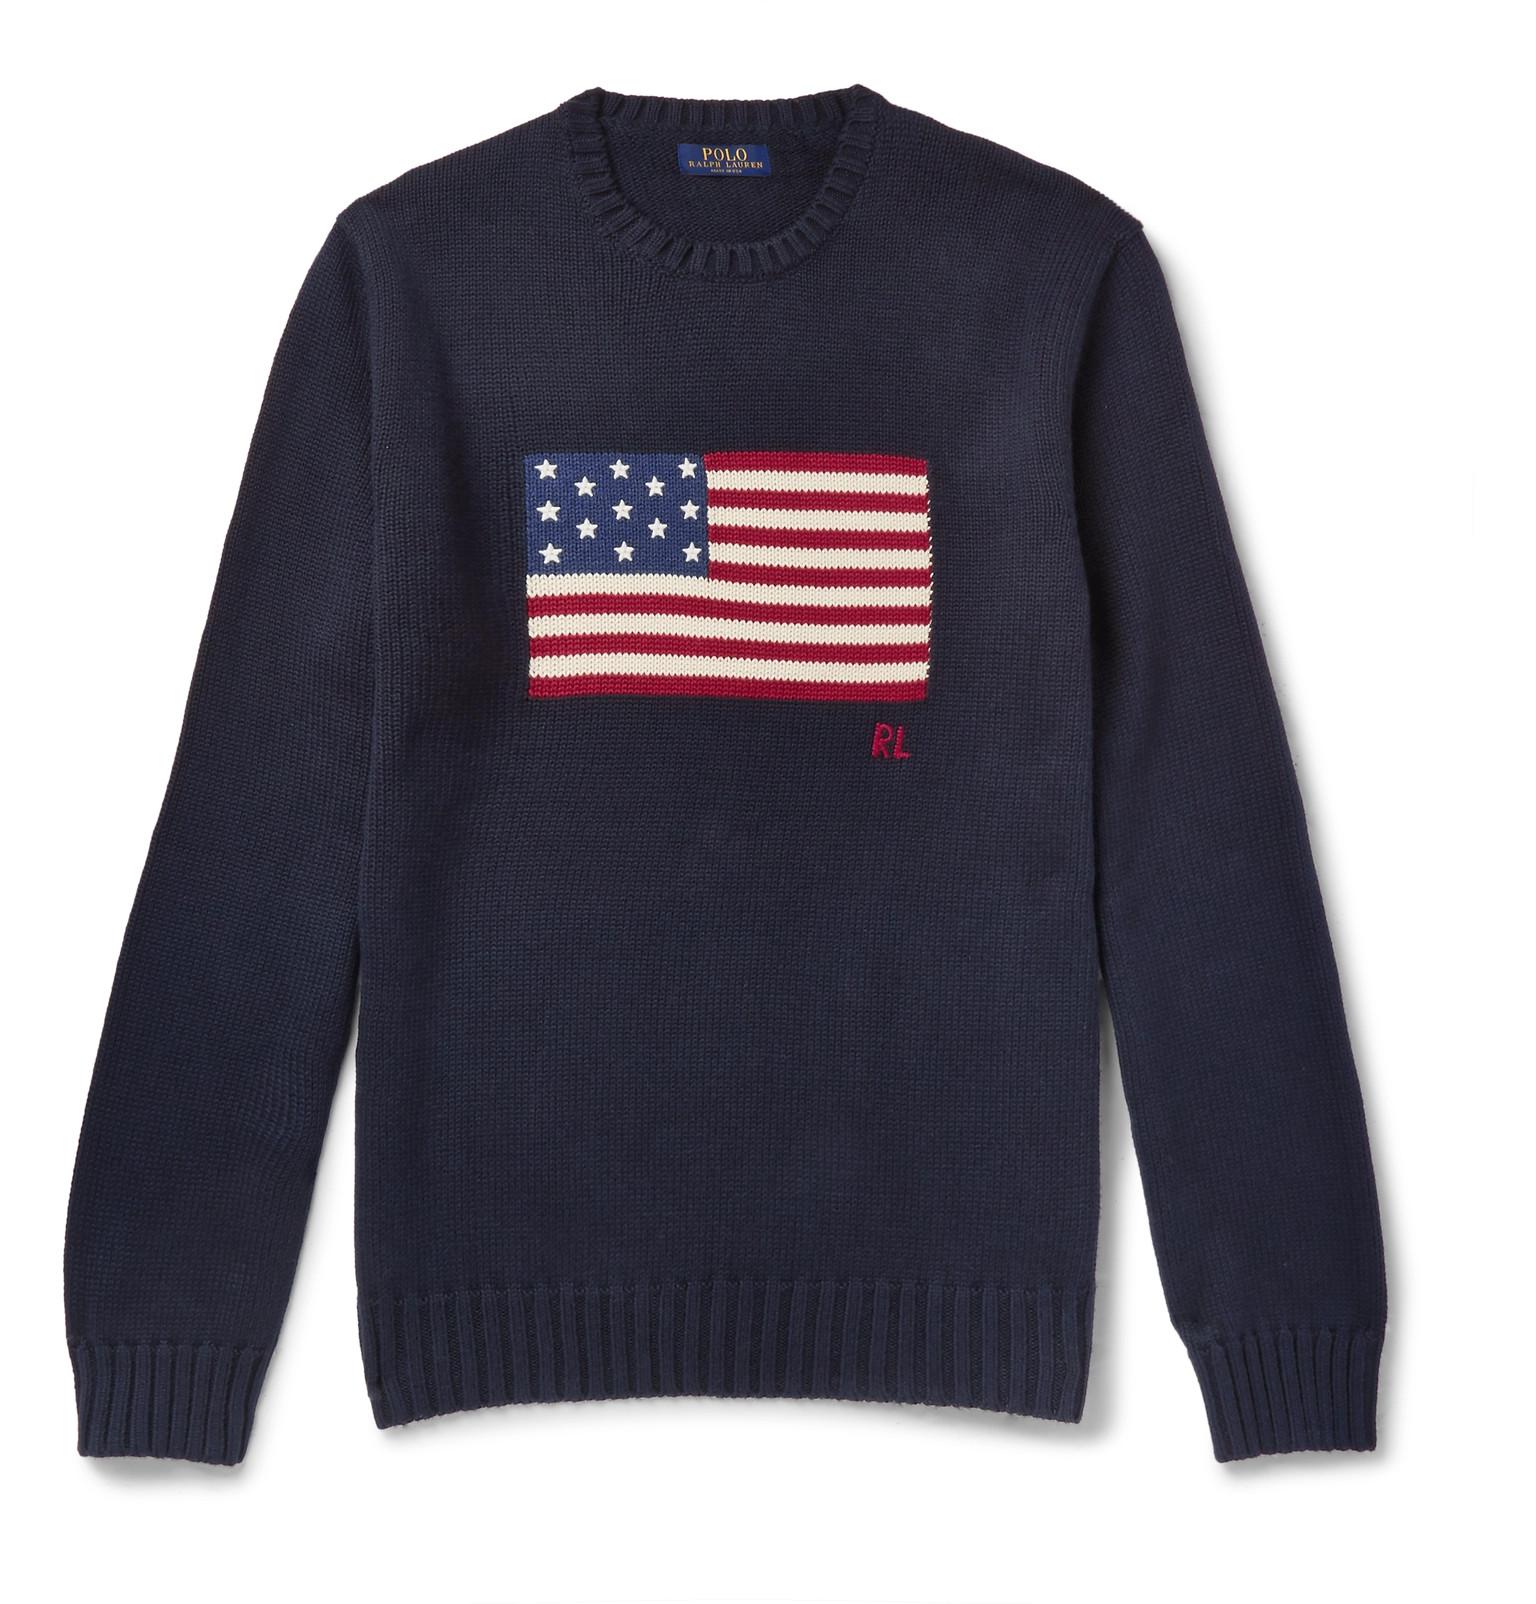 Polo Ralph Lauren Cotton Ralph Lauren The Iconic Flag Sweater in Cream  (Blue) for Men - Save 67% - Lyst